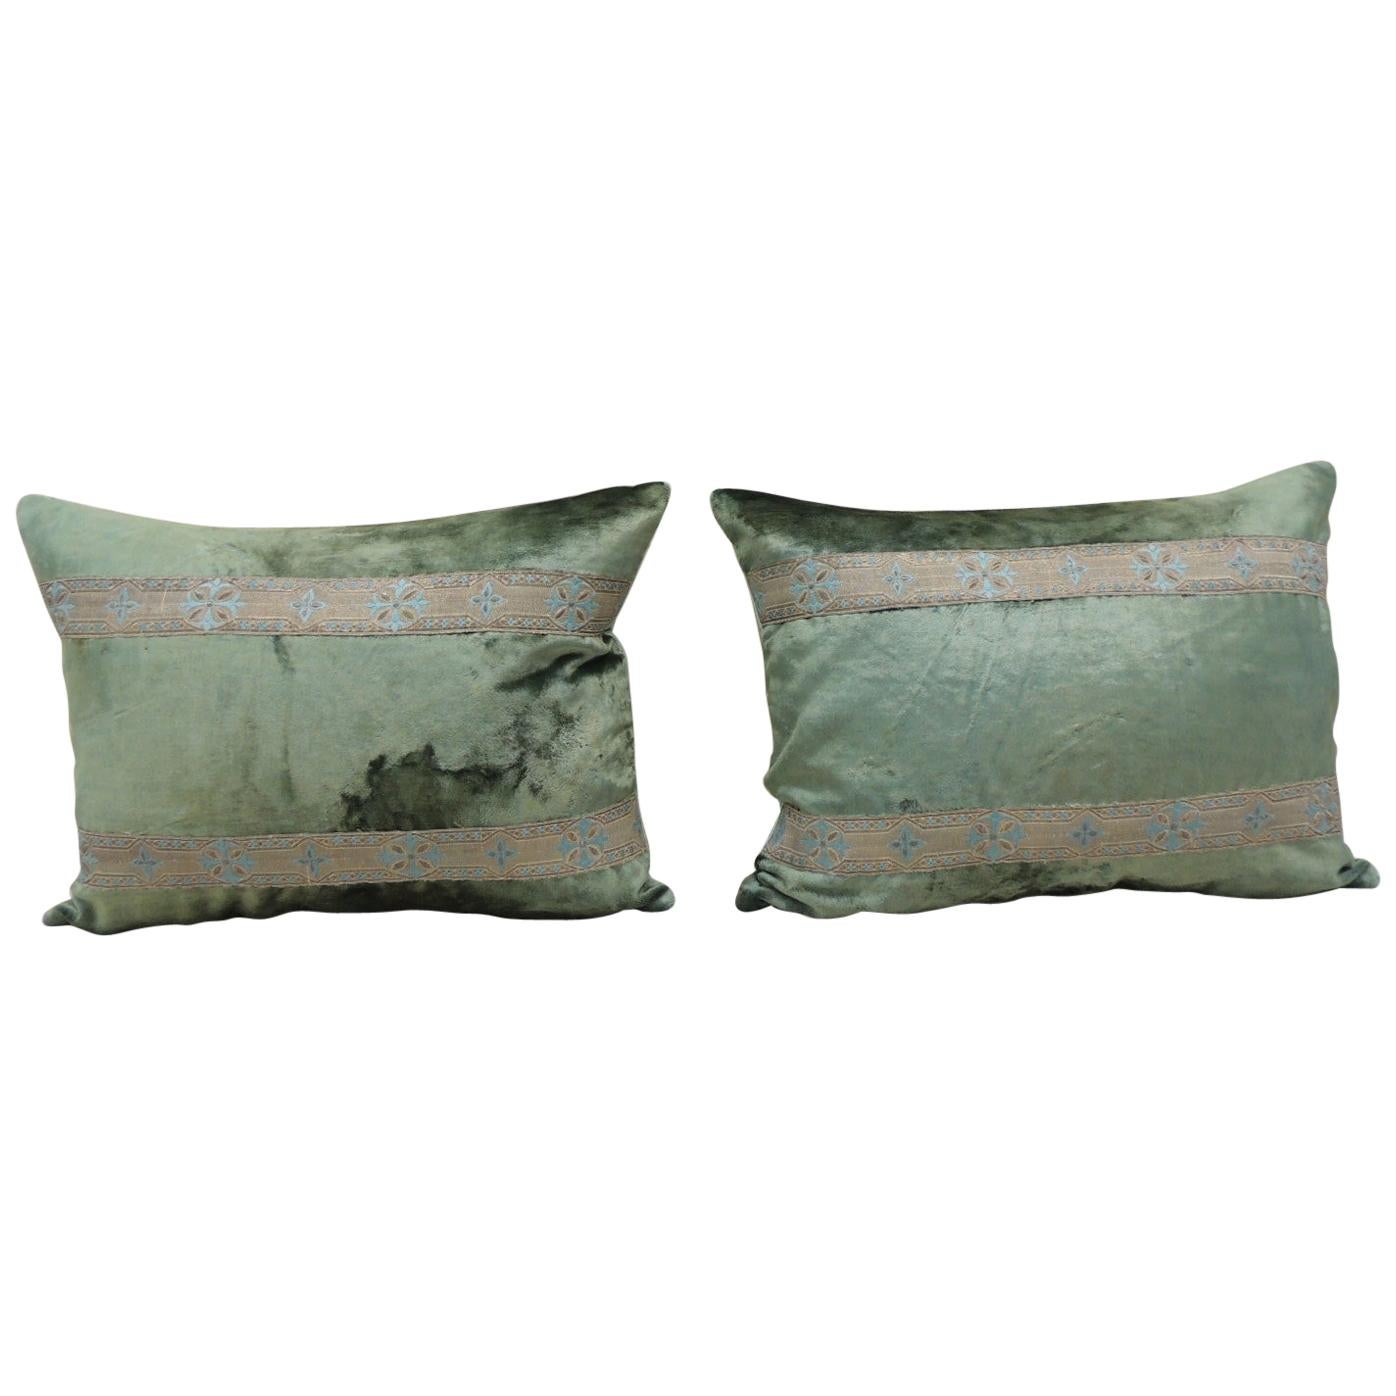 Pair of Antique Crushed Velvet Green and Silver Bolsters Decorative Pillows